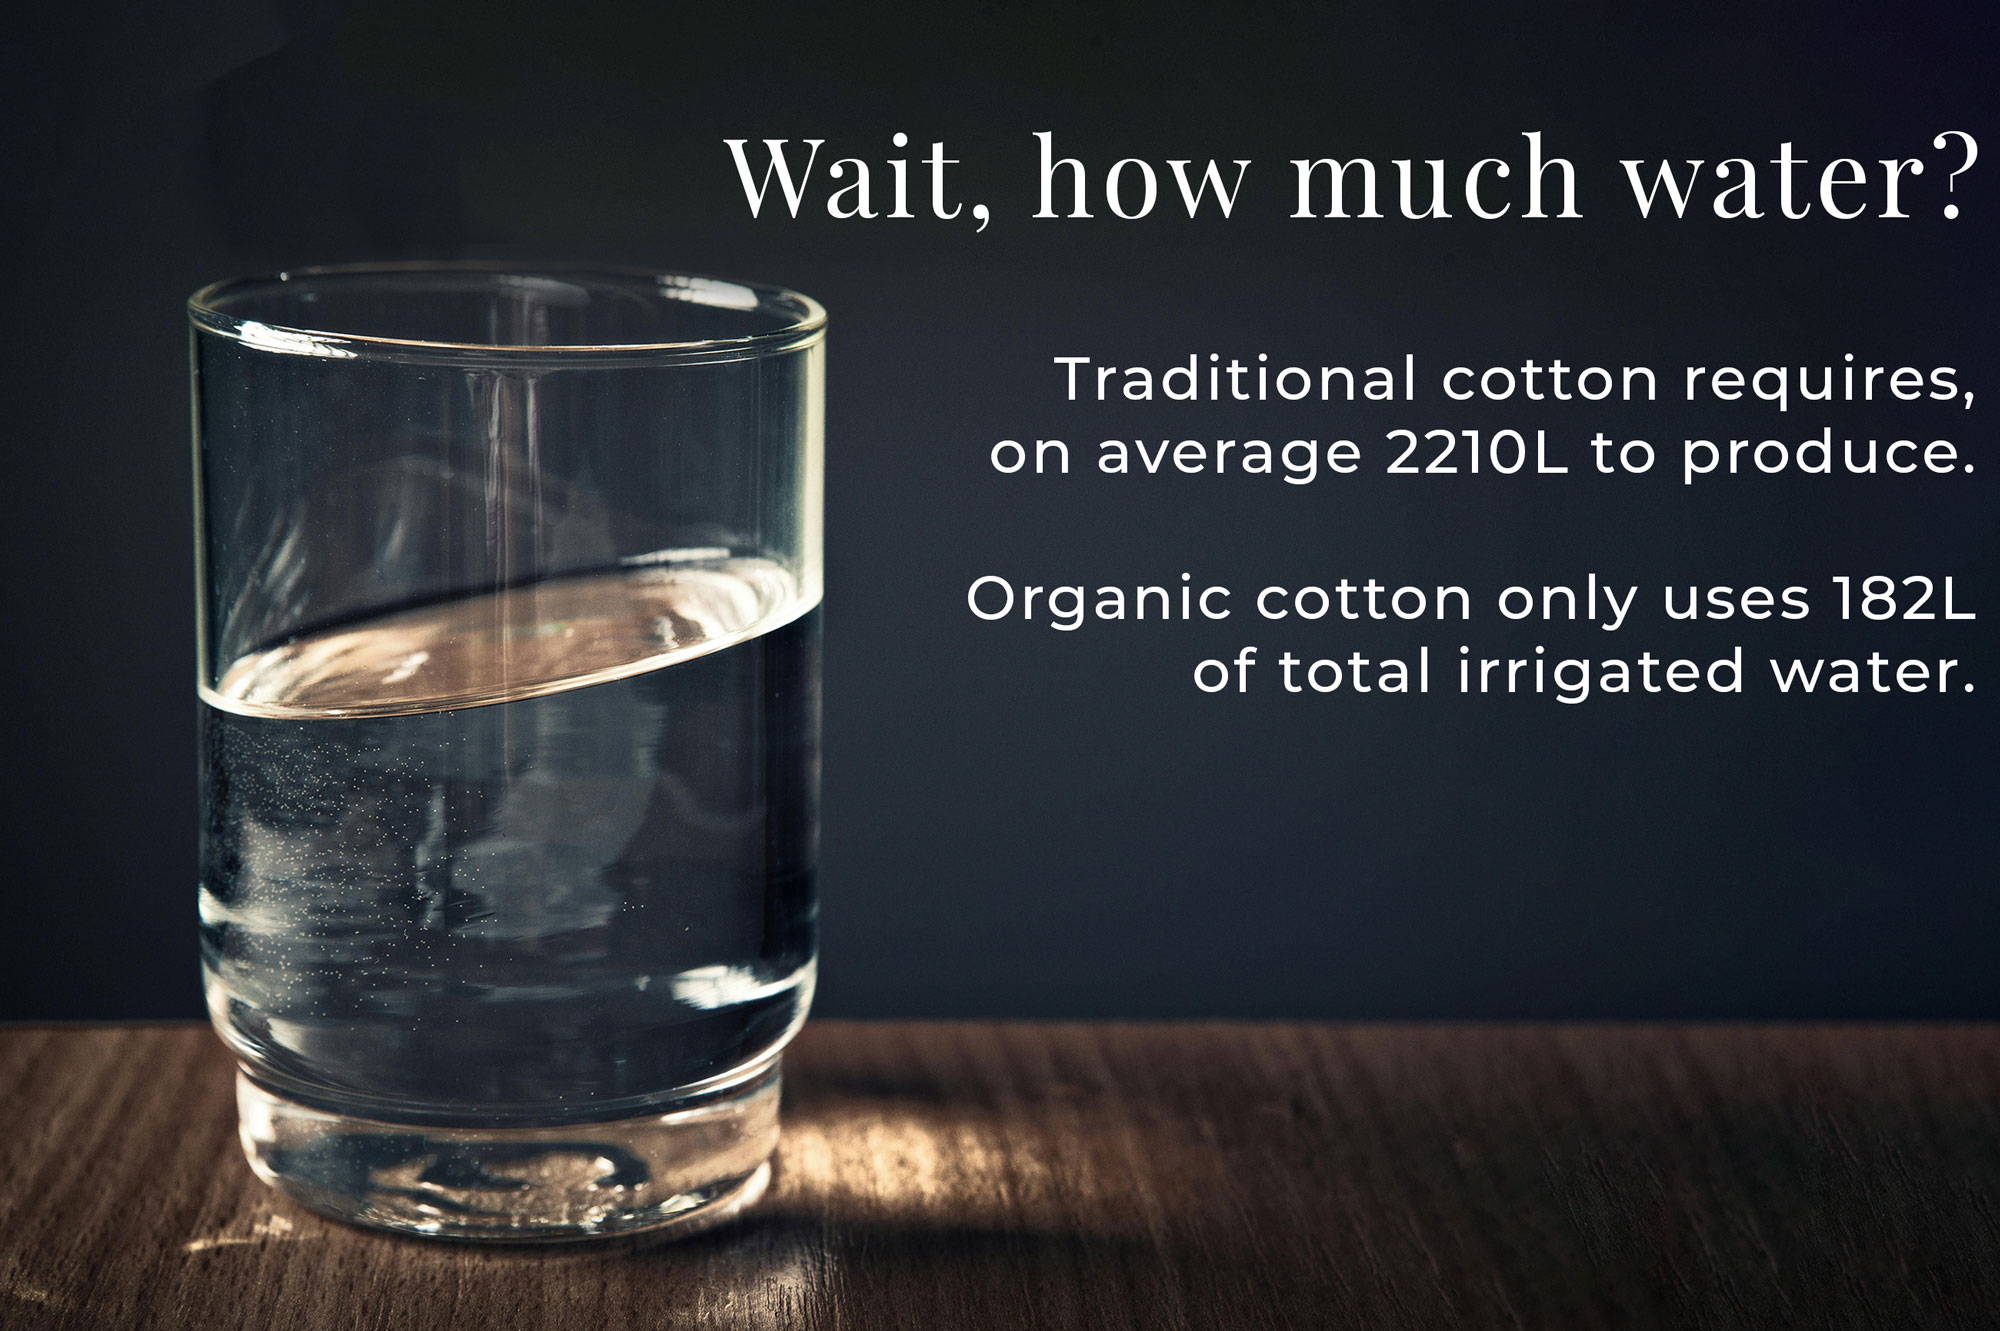 Traditional cotton needs 2210 litres of water to produce, whereas organic cotton only needs 182 litres.